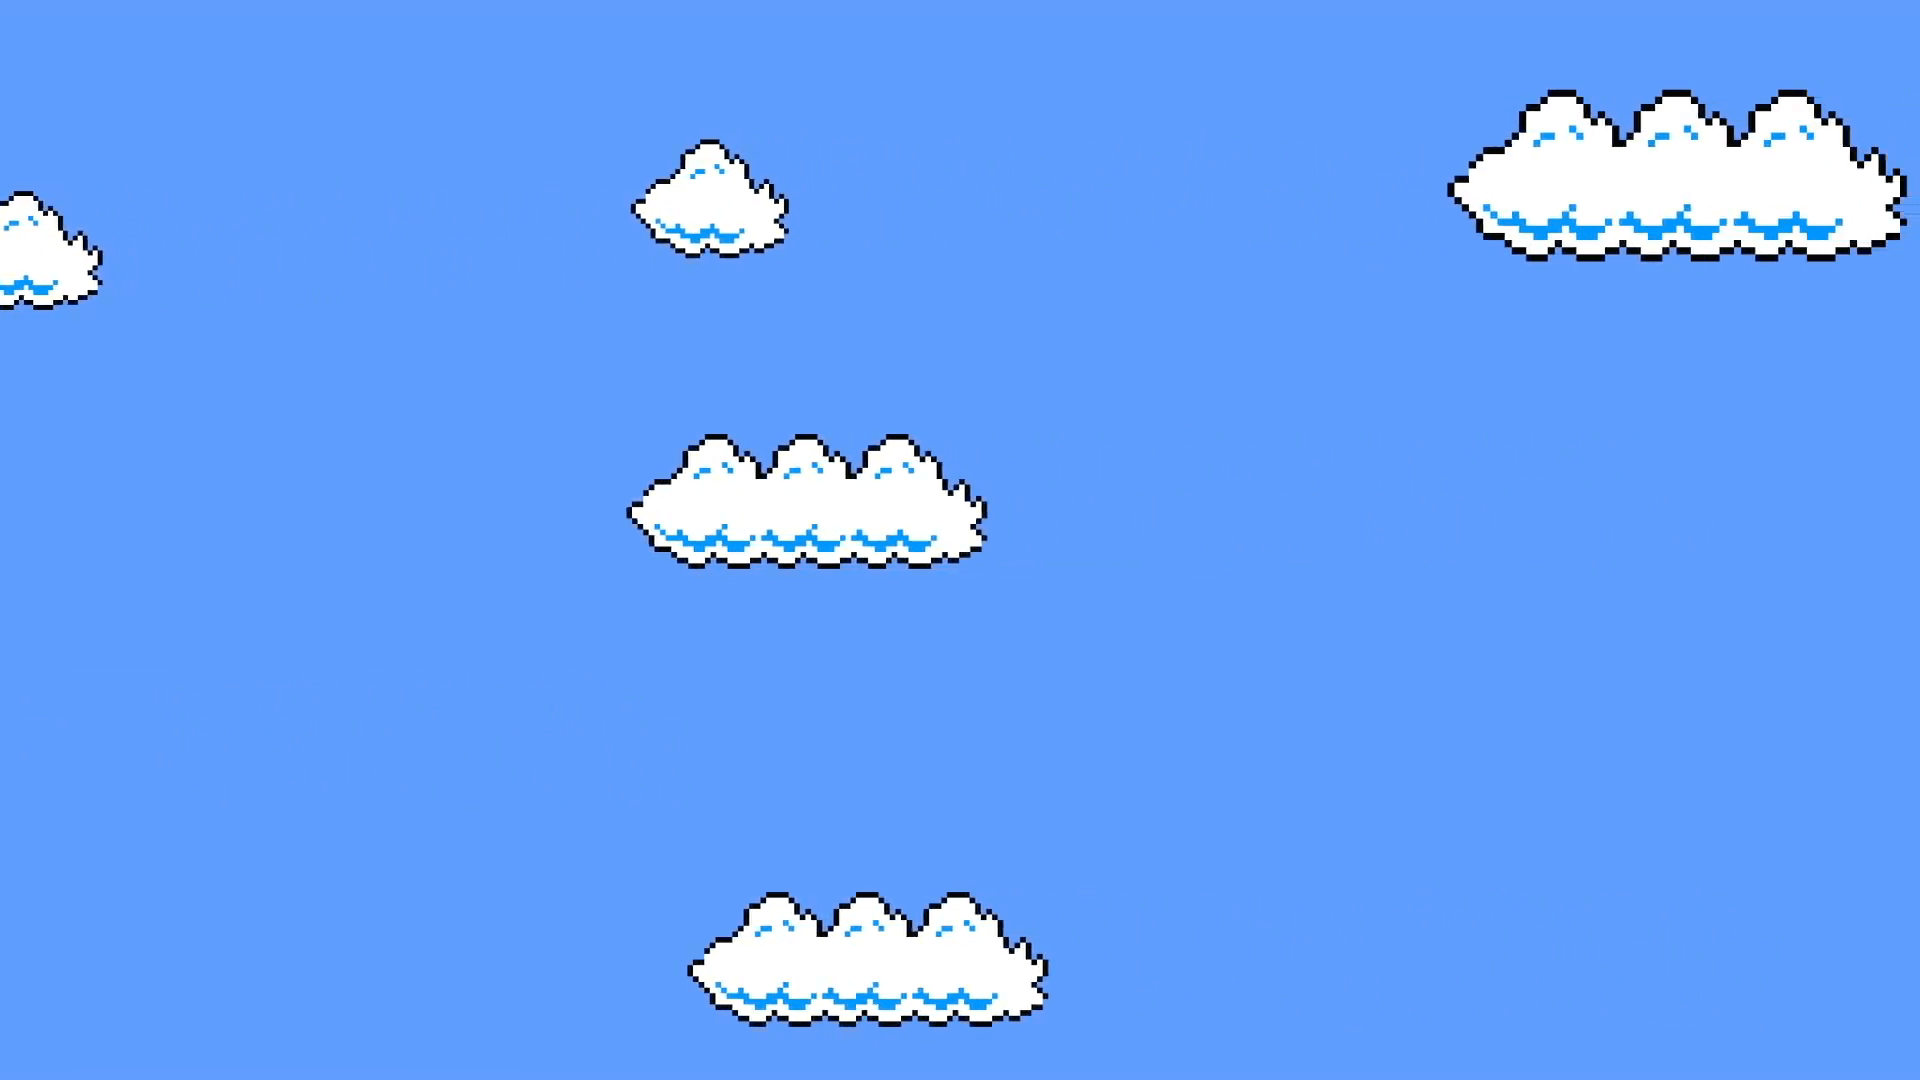 Animation of 1980's Old Arcade Super Mario Bros. Clouds Background